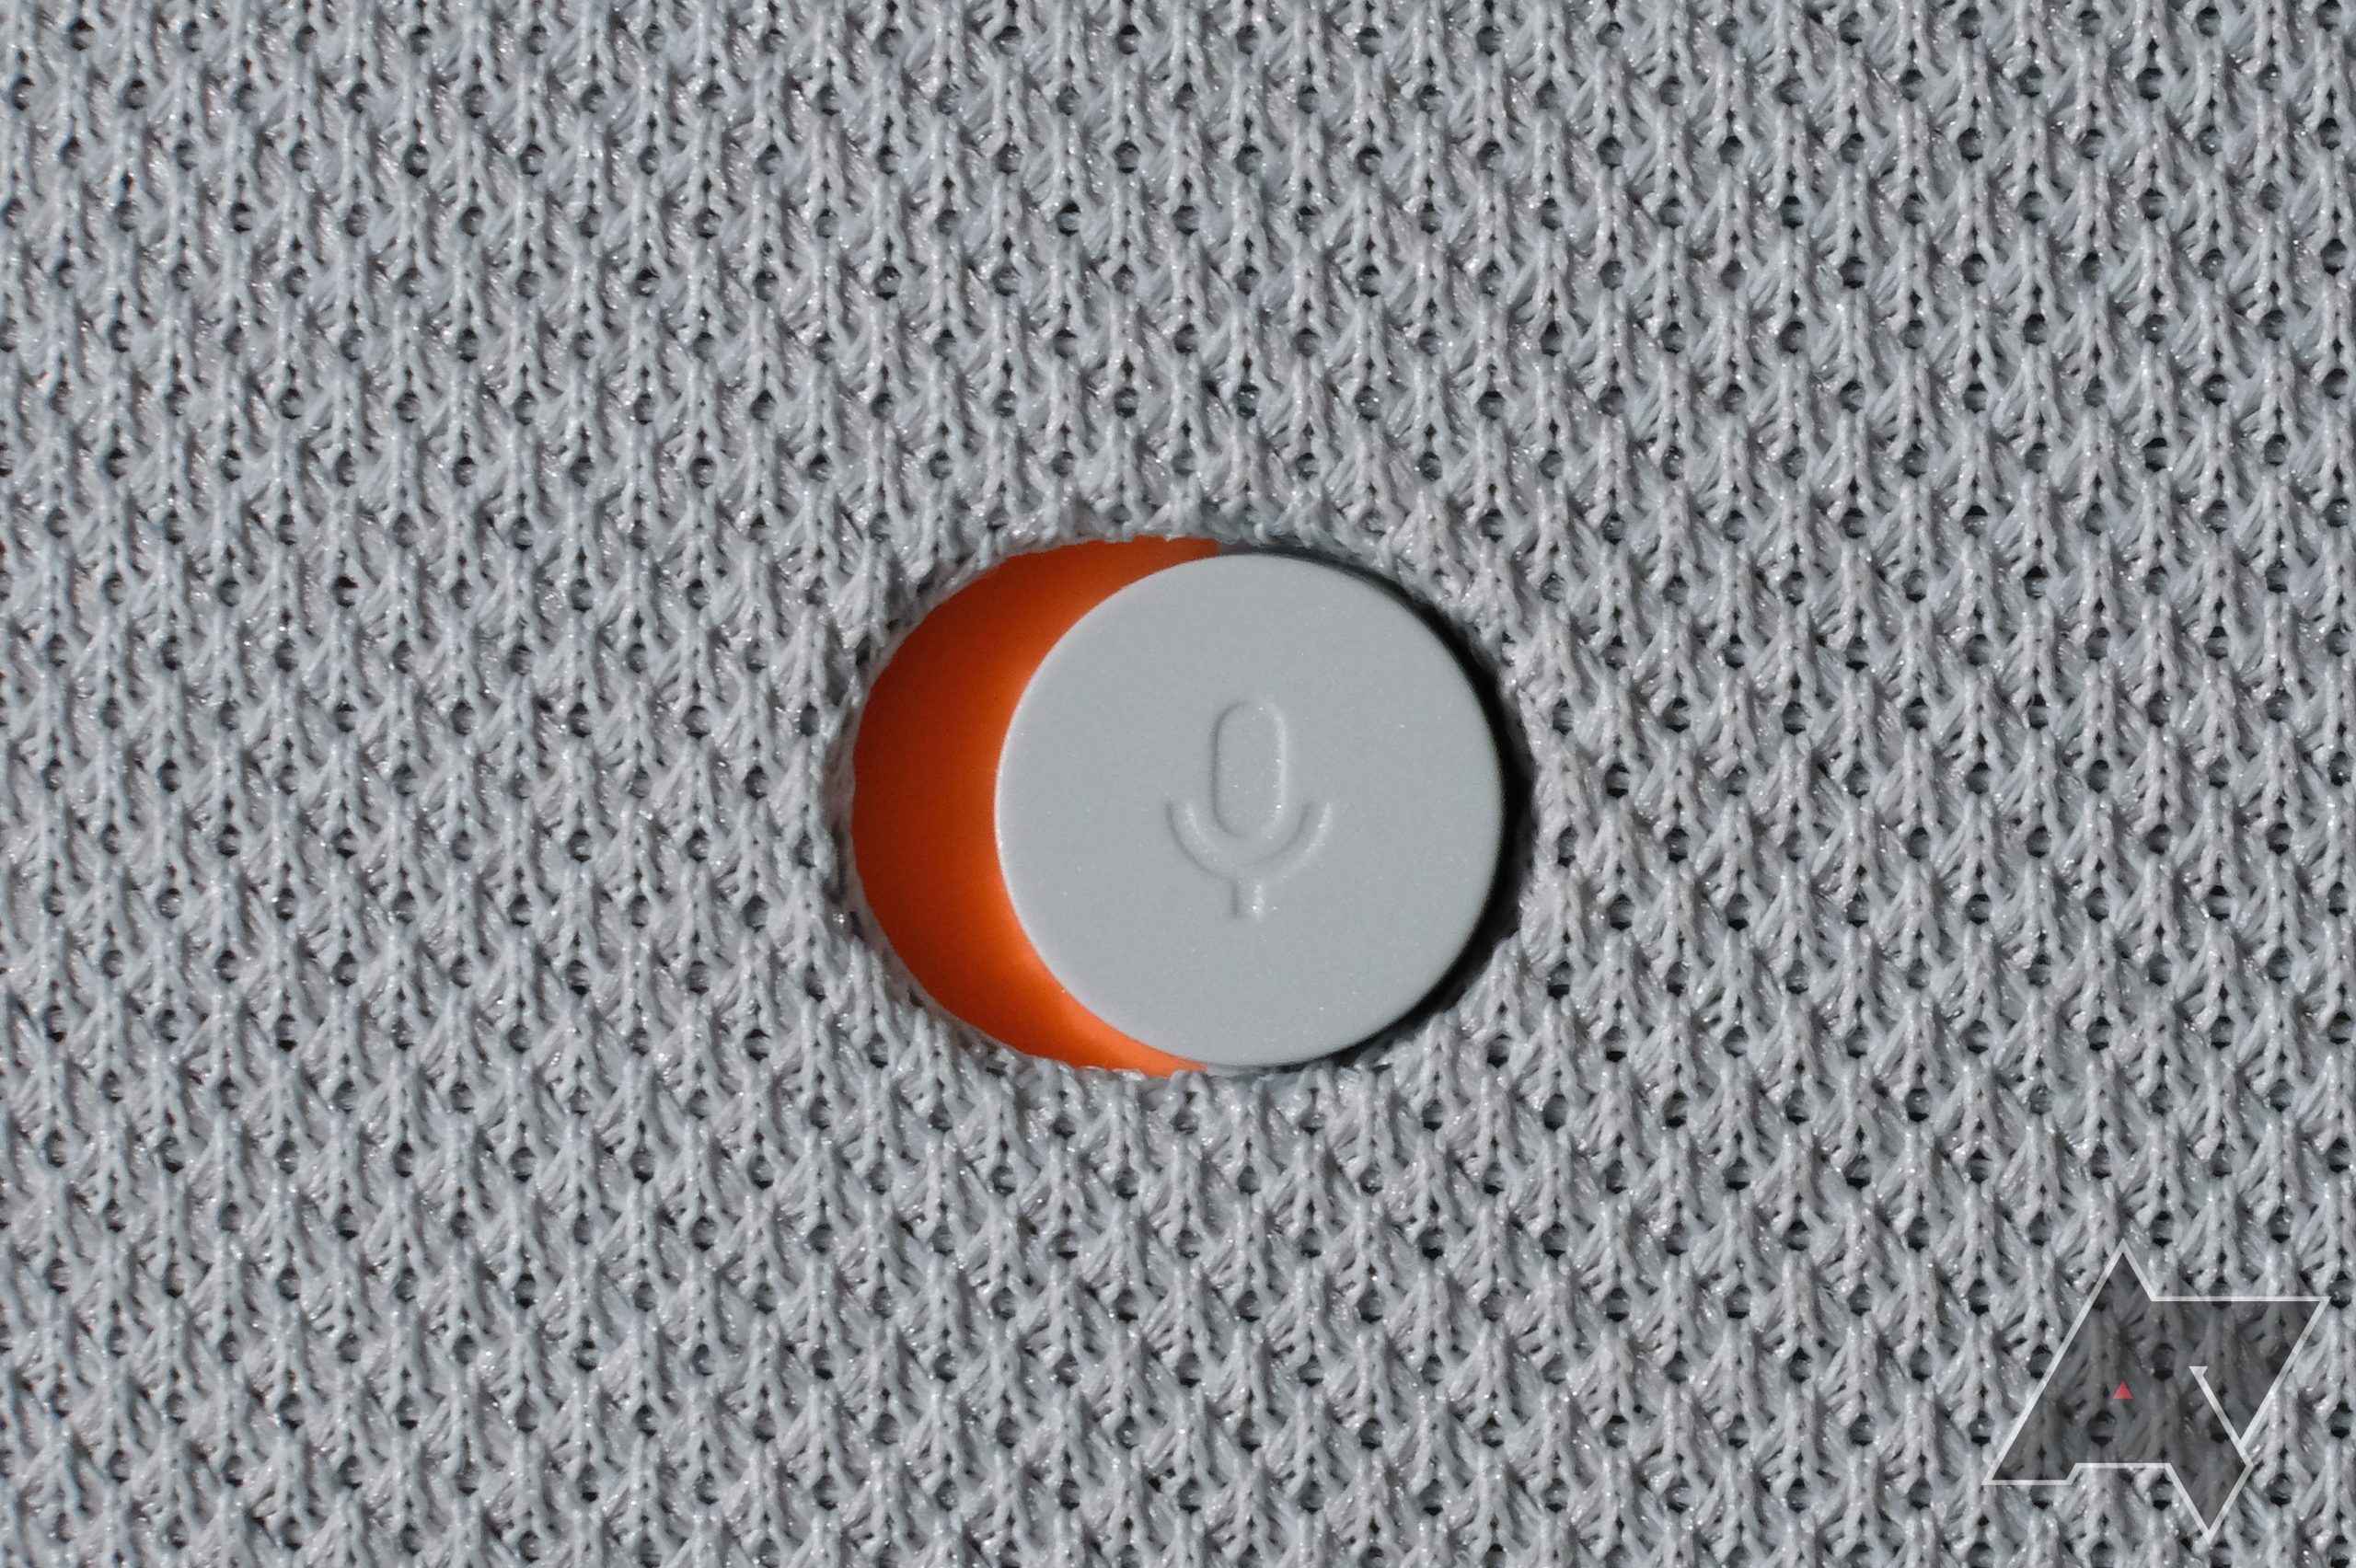 Close-up showing the mute switch on the Google Nest Audio speaker